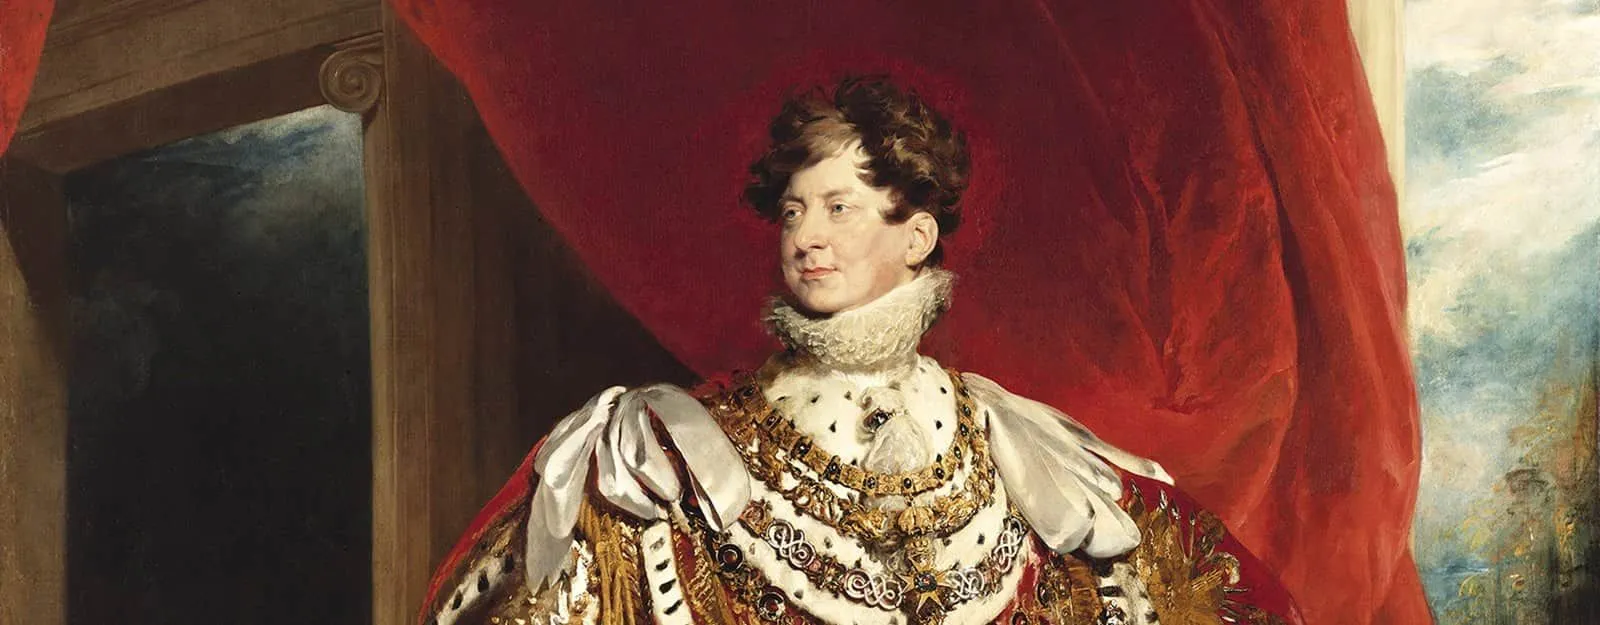 Painting of King George IV at his exhibition.